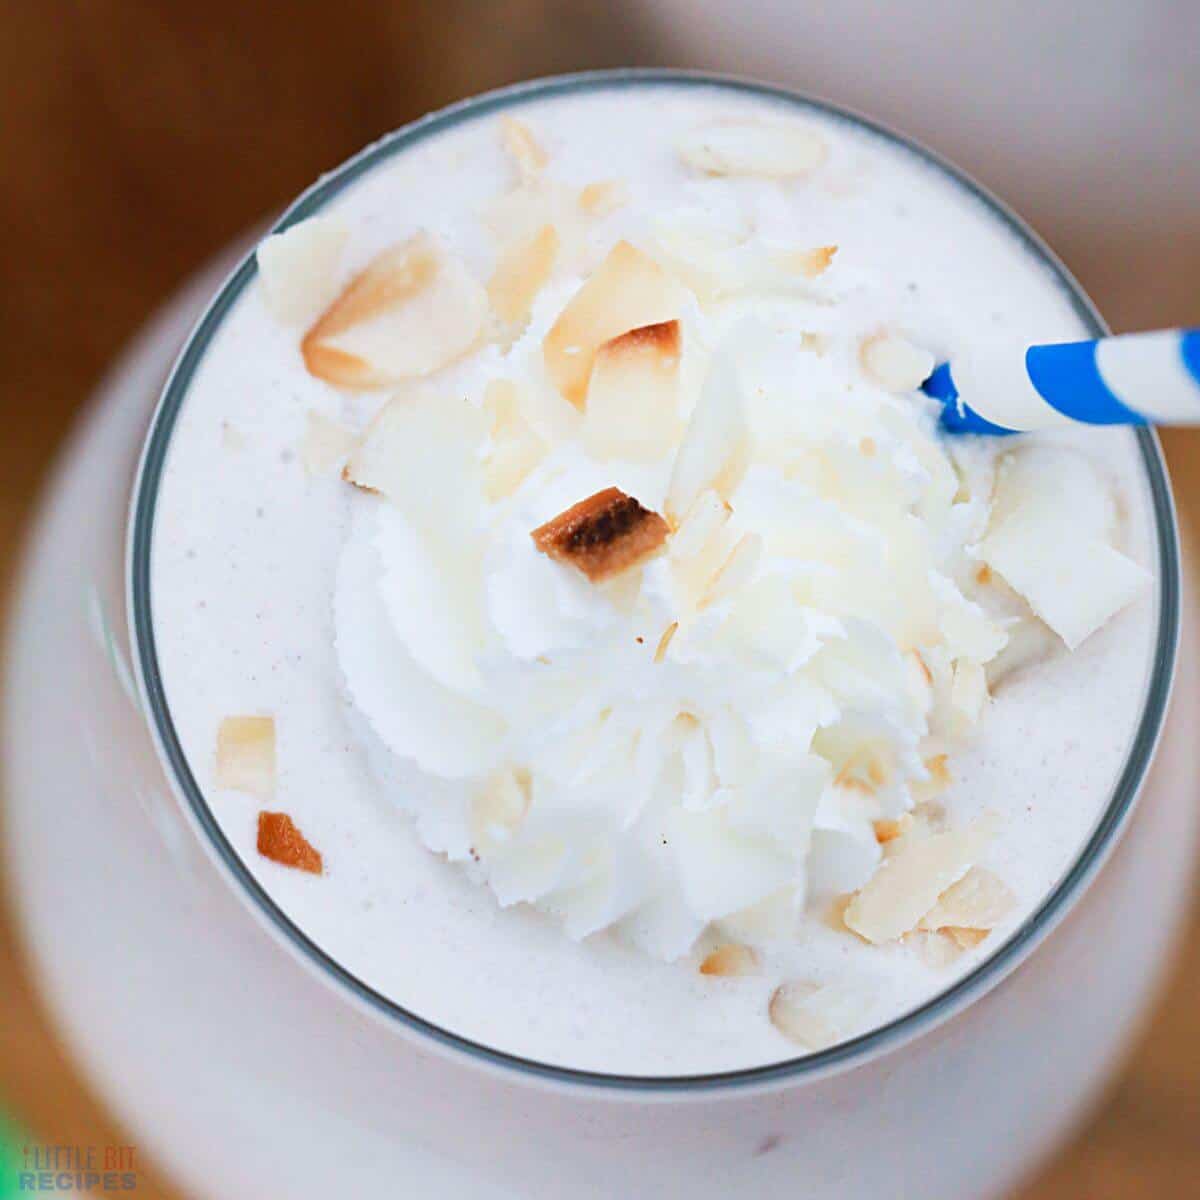 whipped cream and coconut topping.